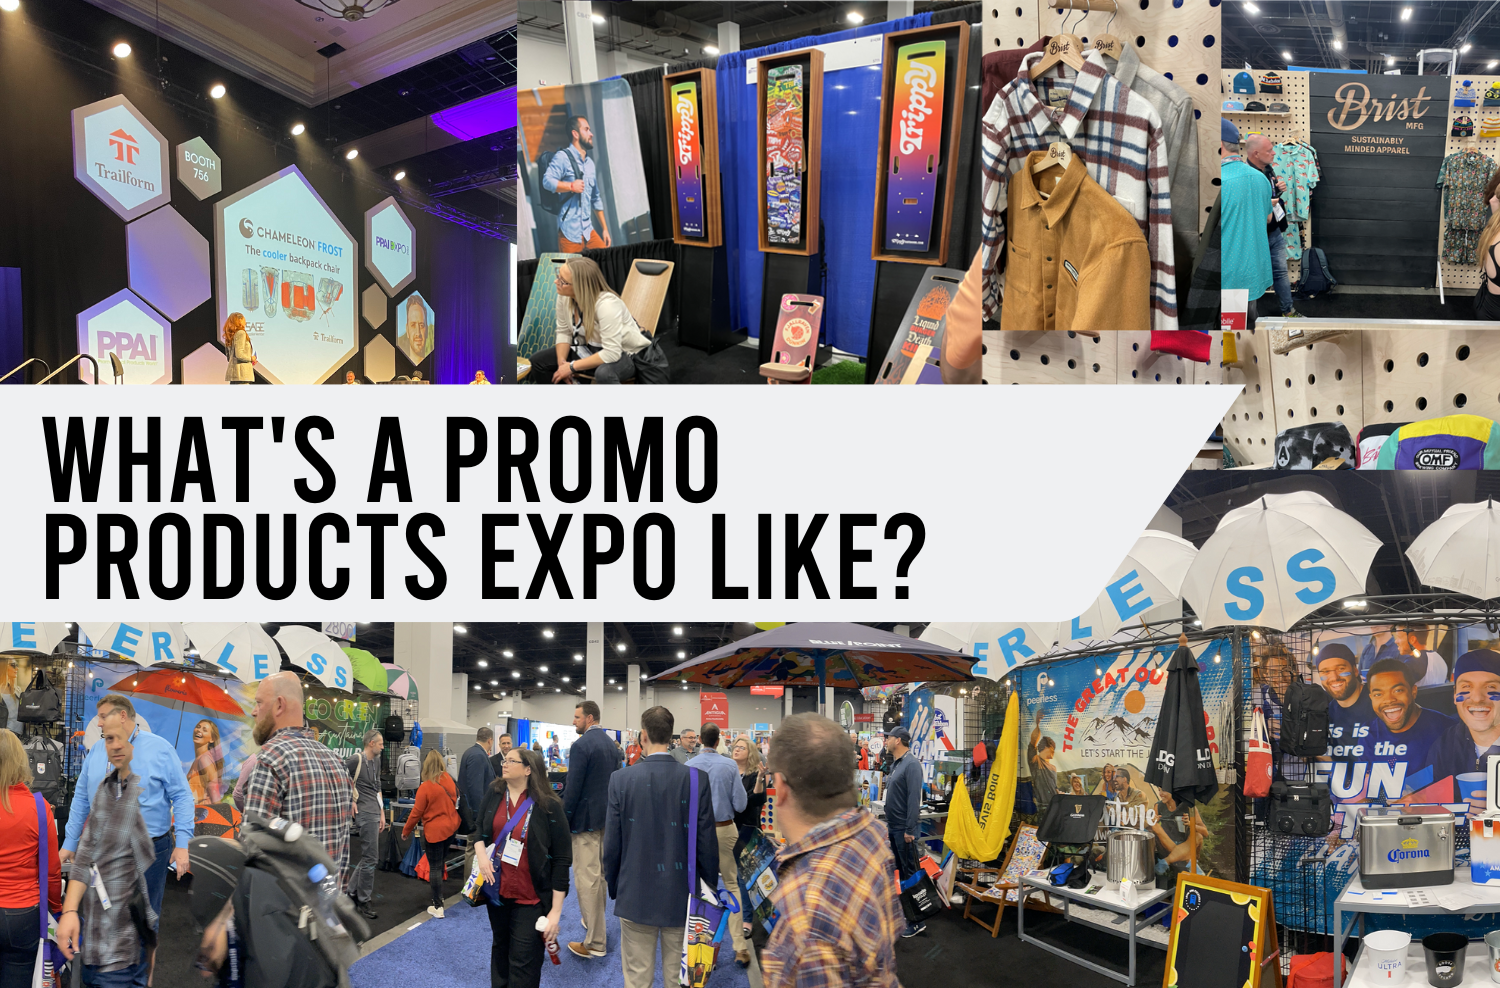 What’s a Promo Product Expo Like?